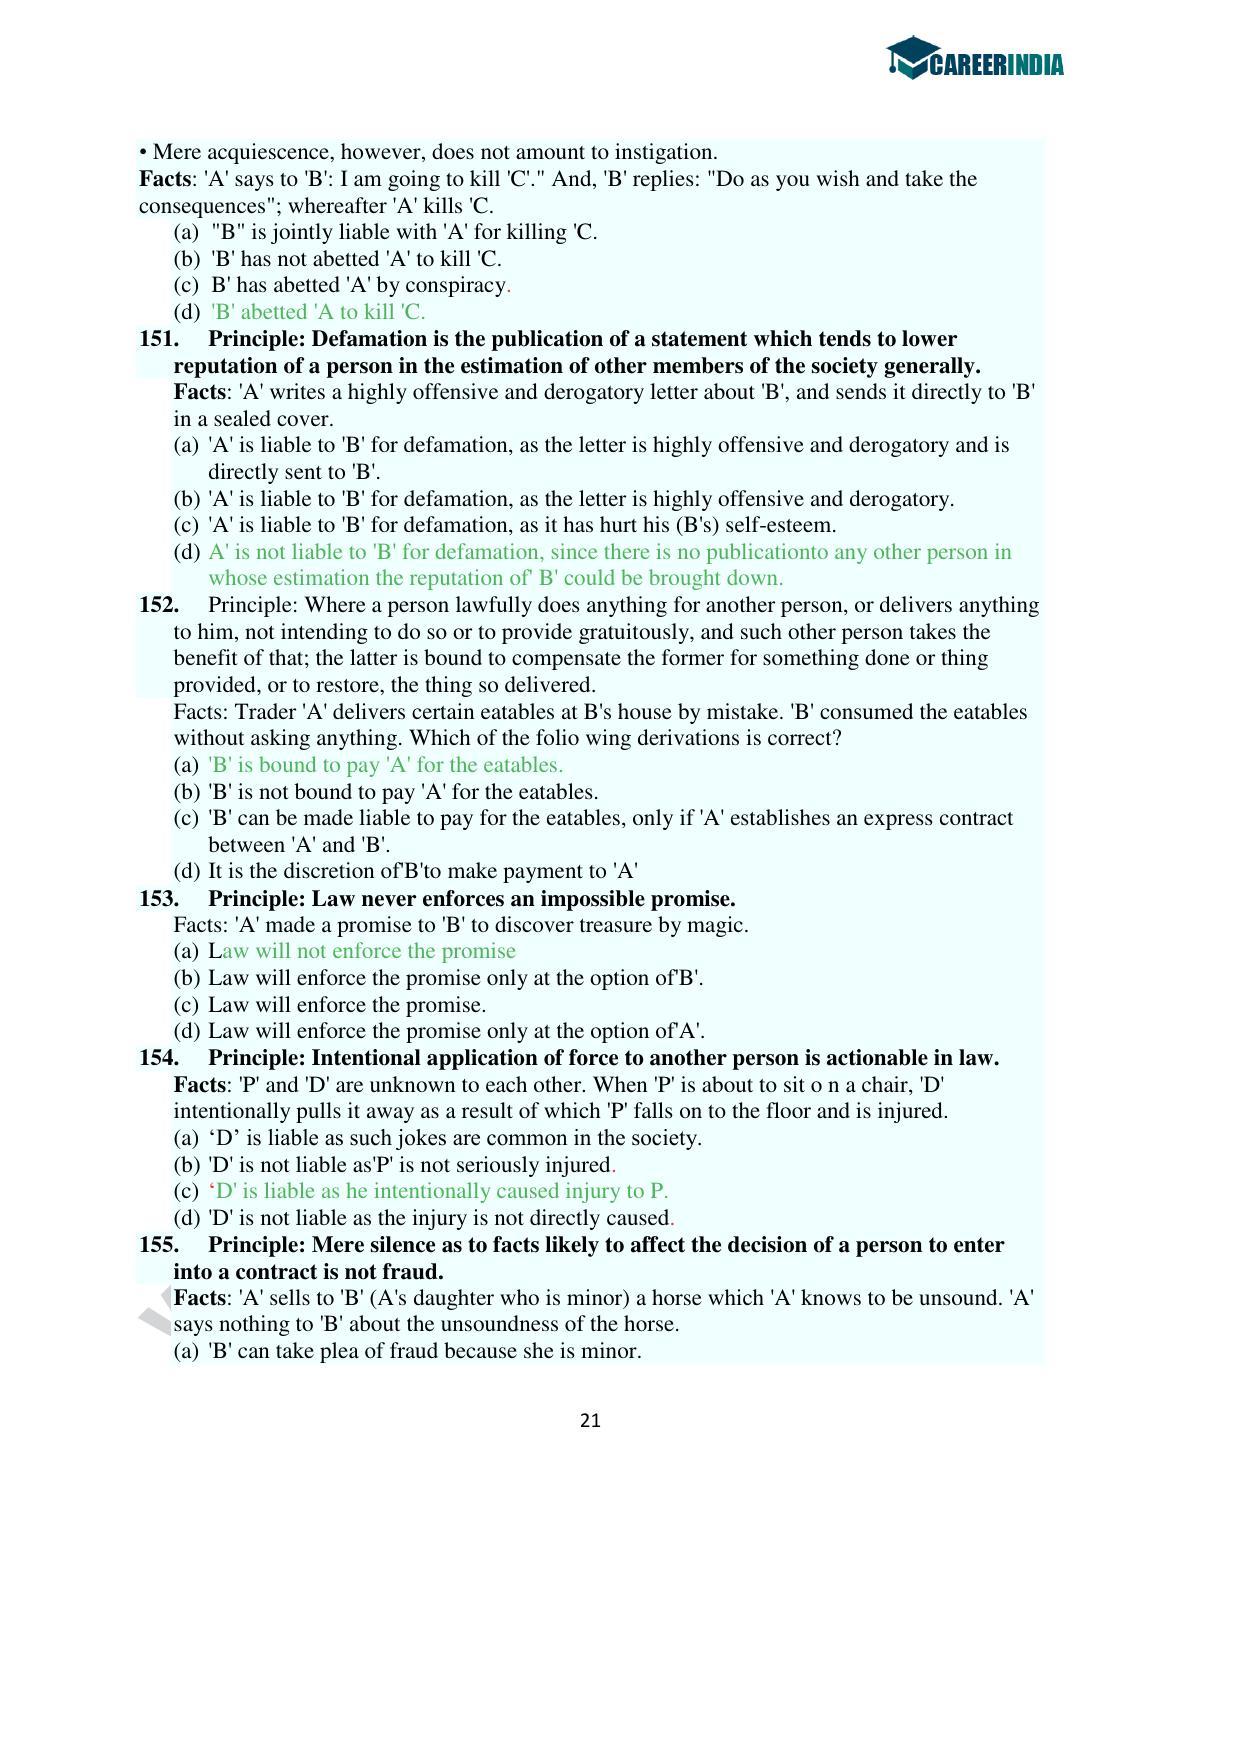 CLAT 2016 UG Question Paper with Answer Key - Page 21